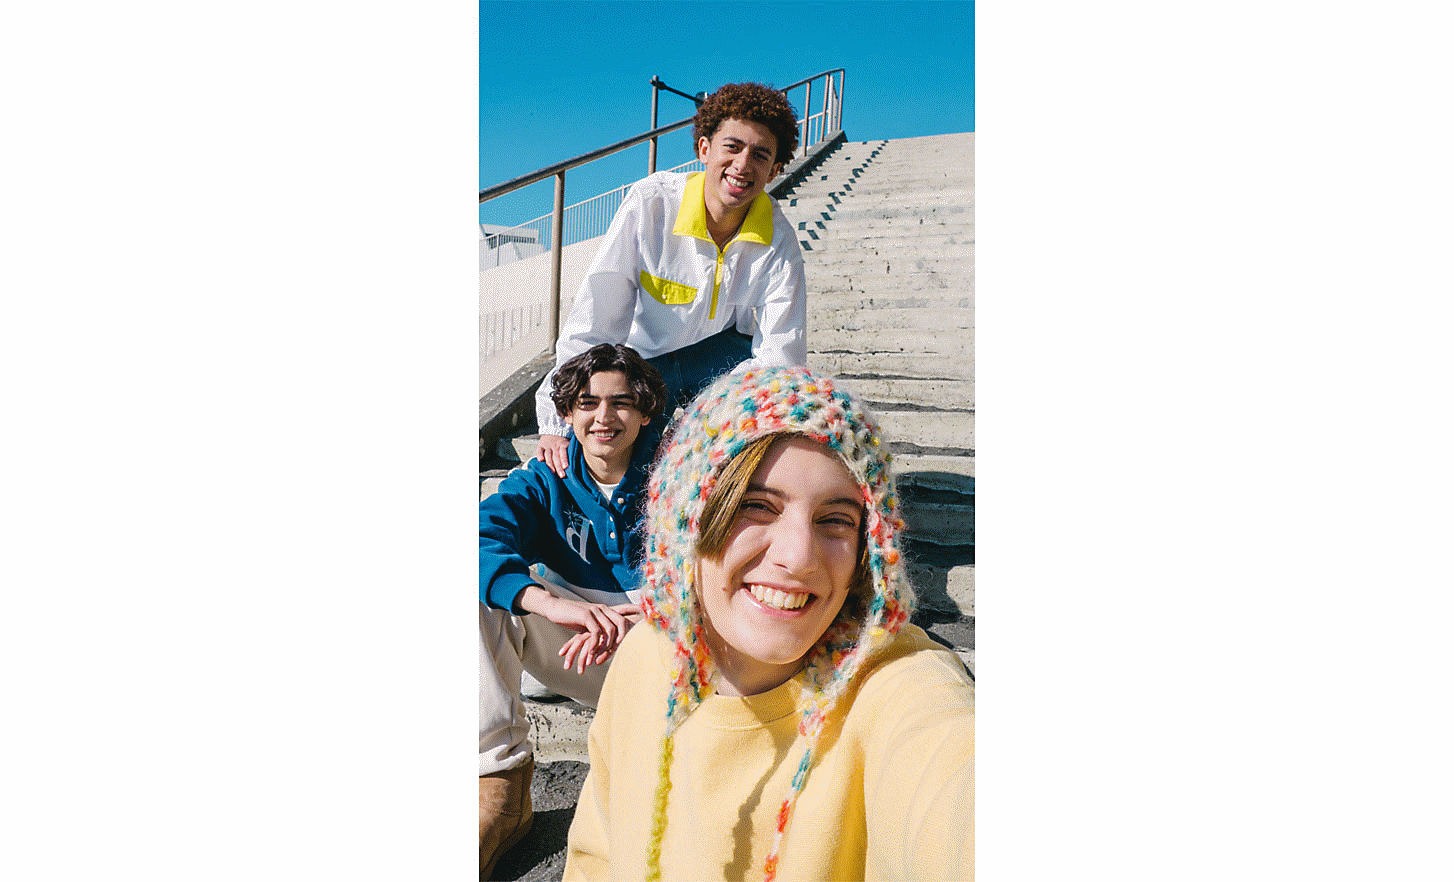 Selfie of three friends sitting on some steps